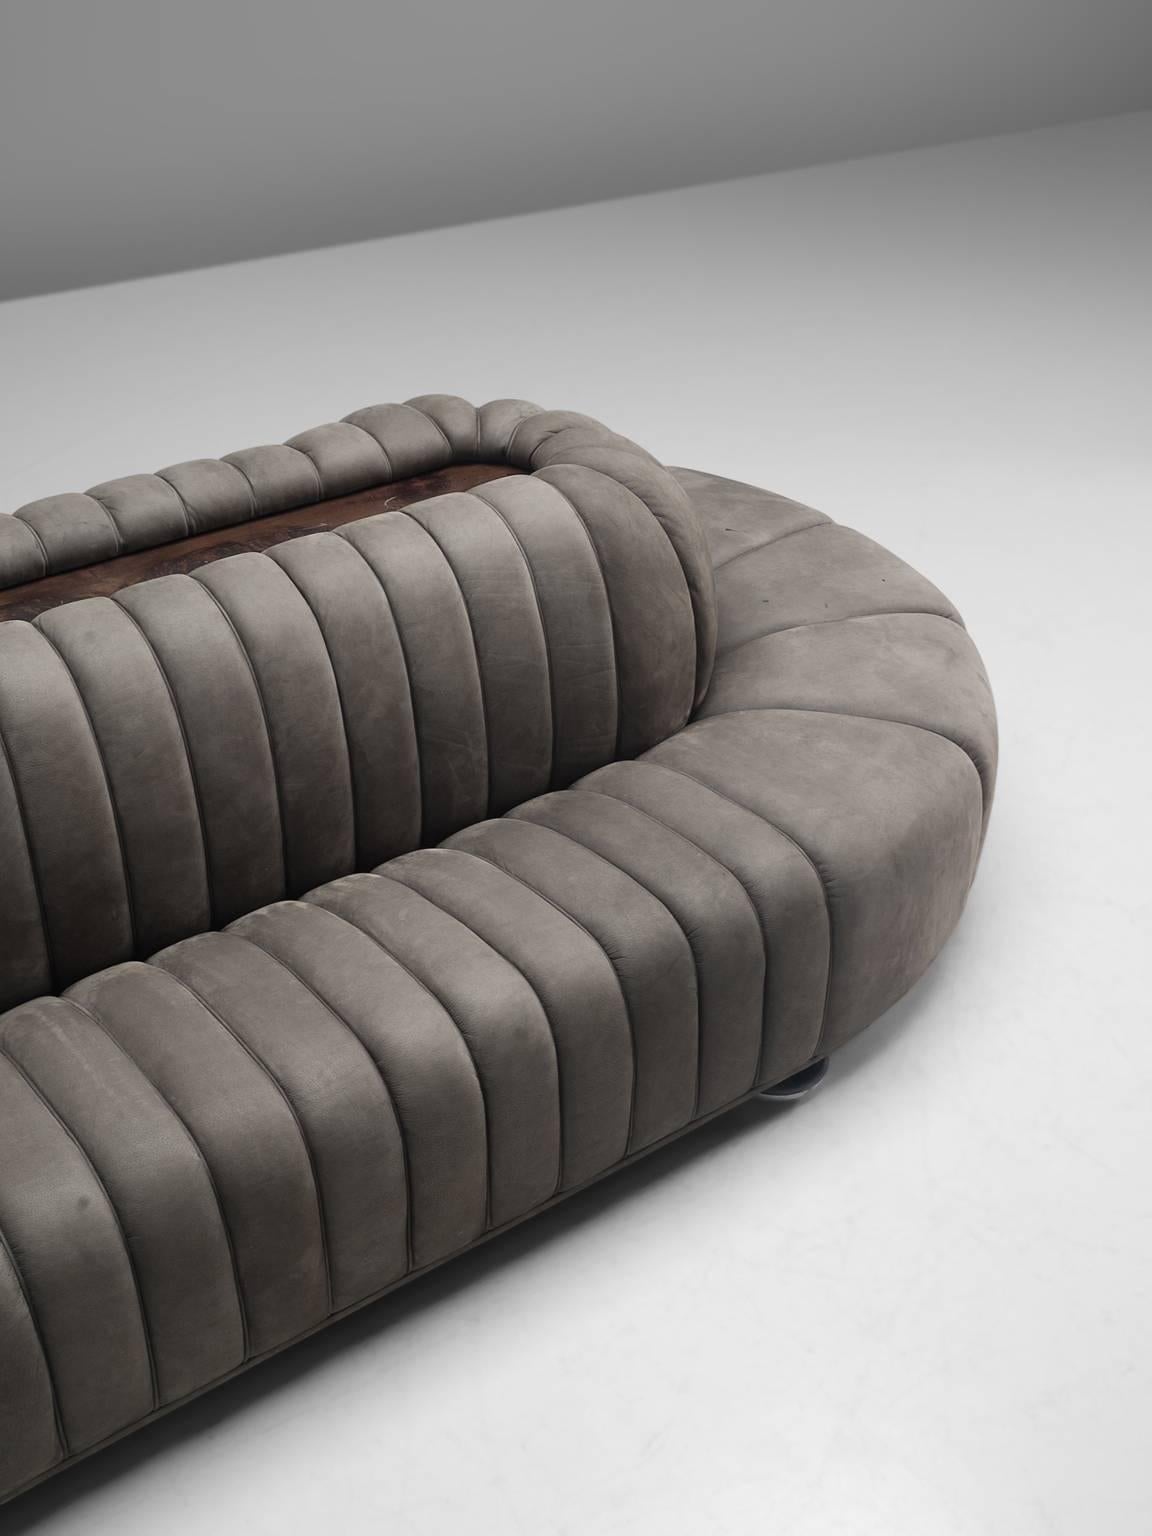 Custom-Made Luxurious Wittmann Sofa in Anthracite Leather 2